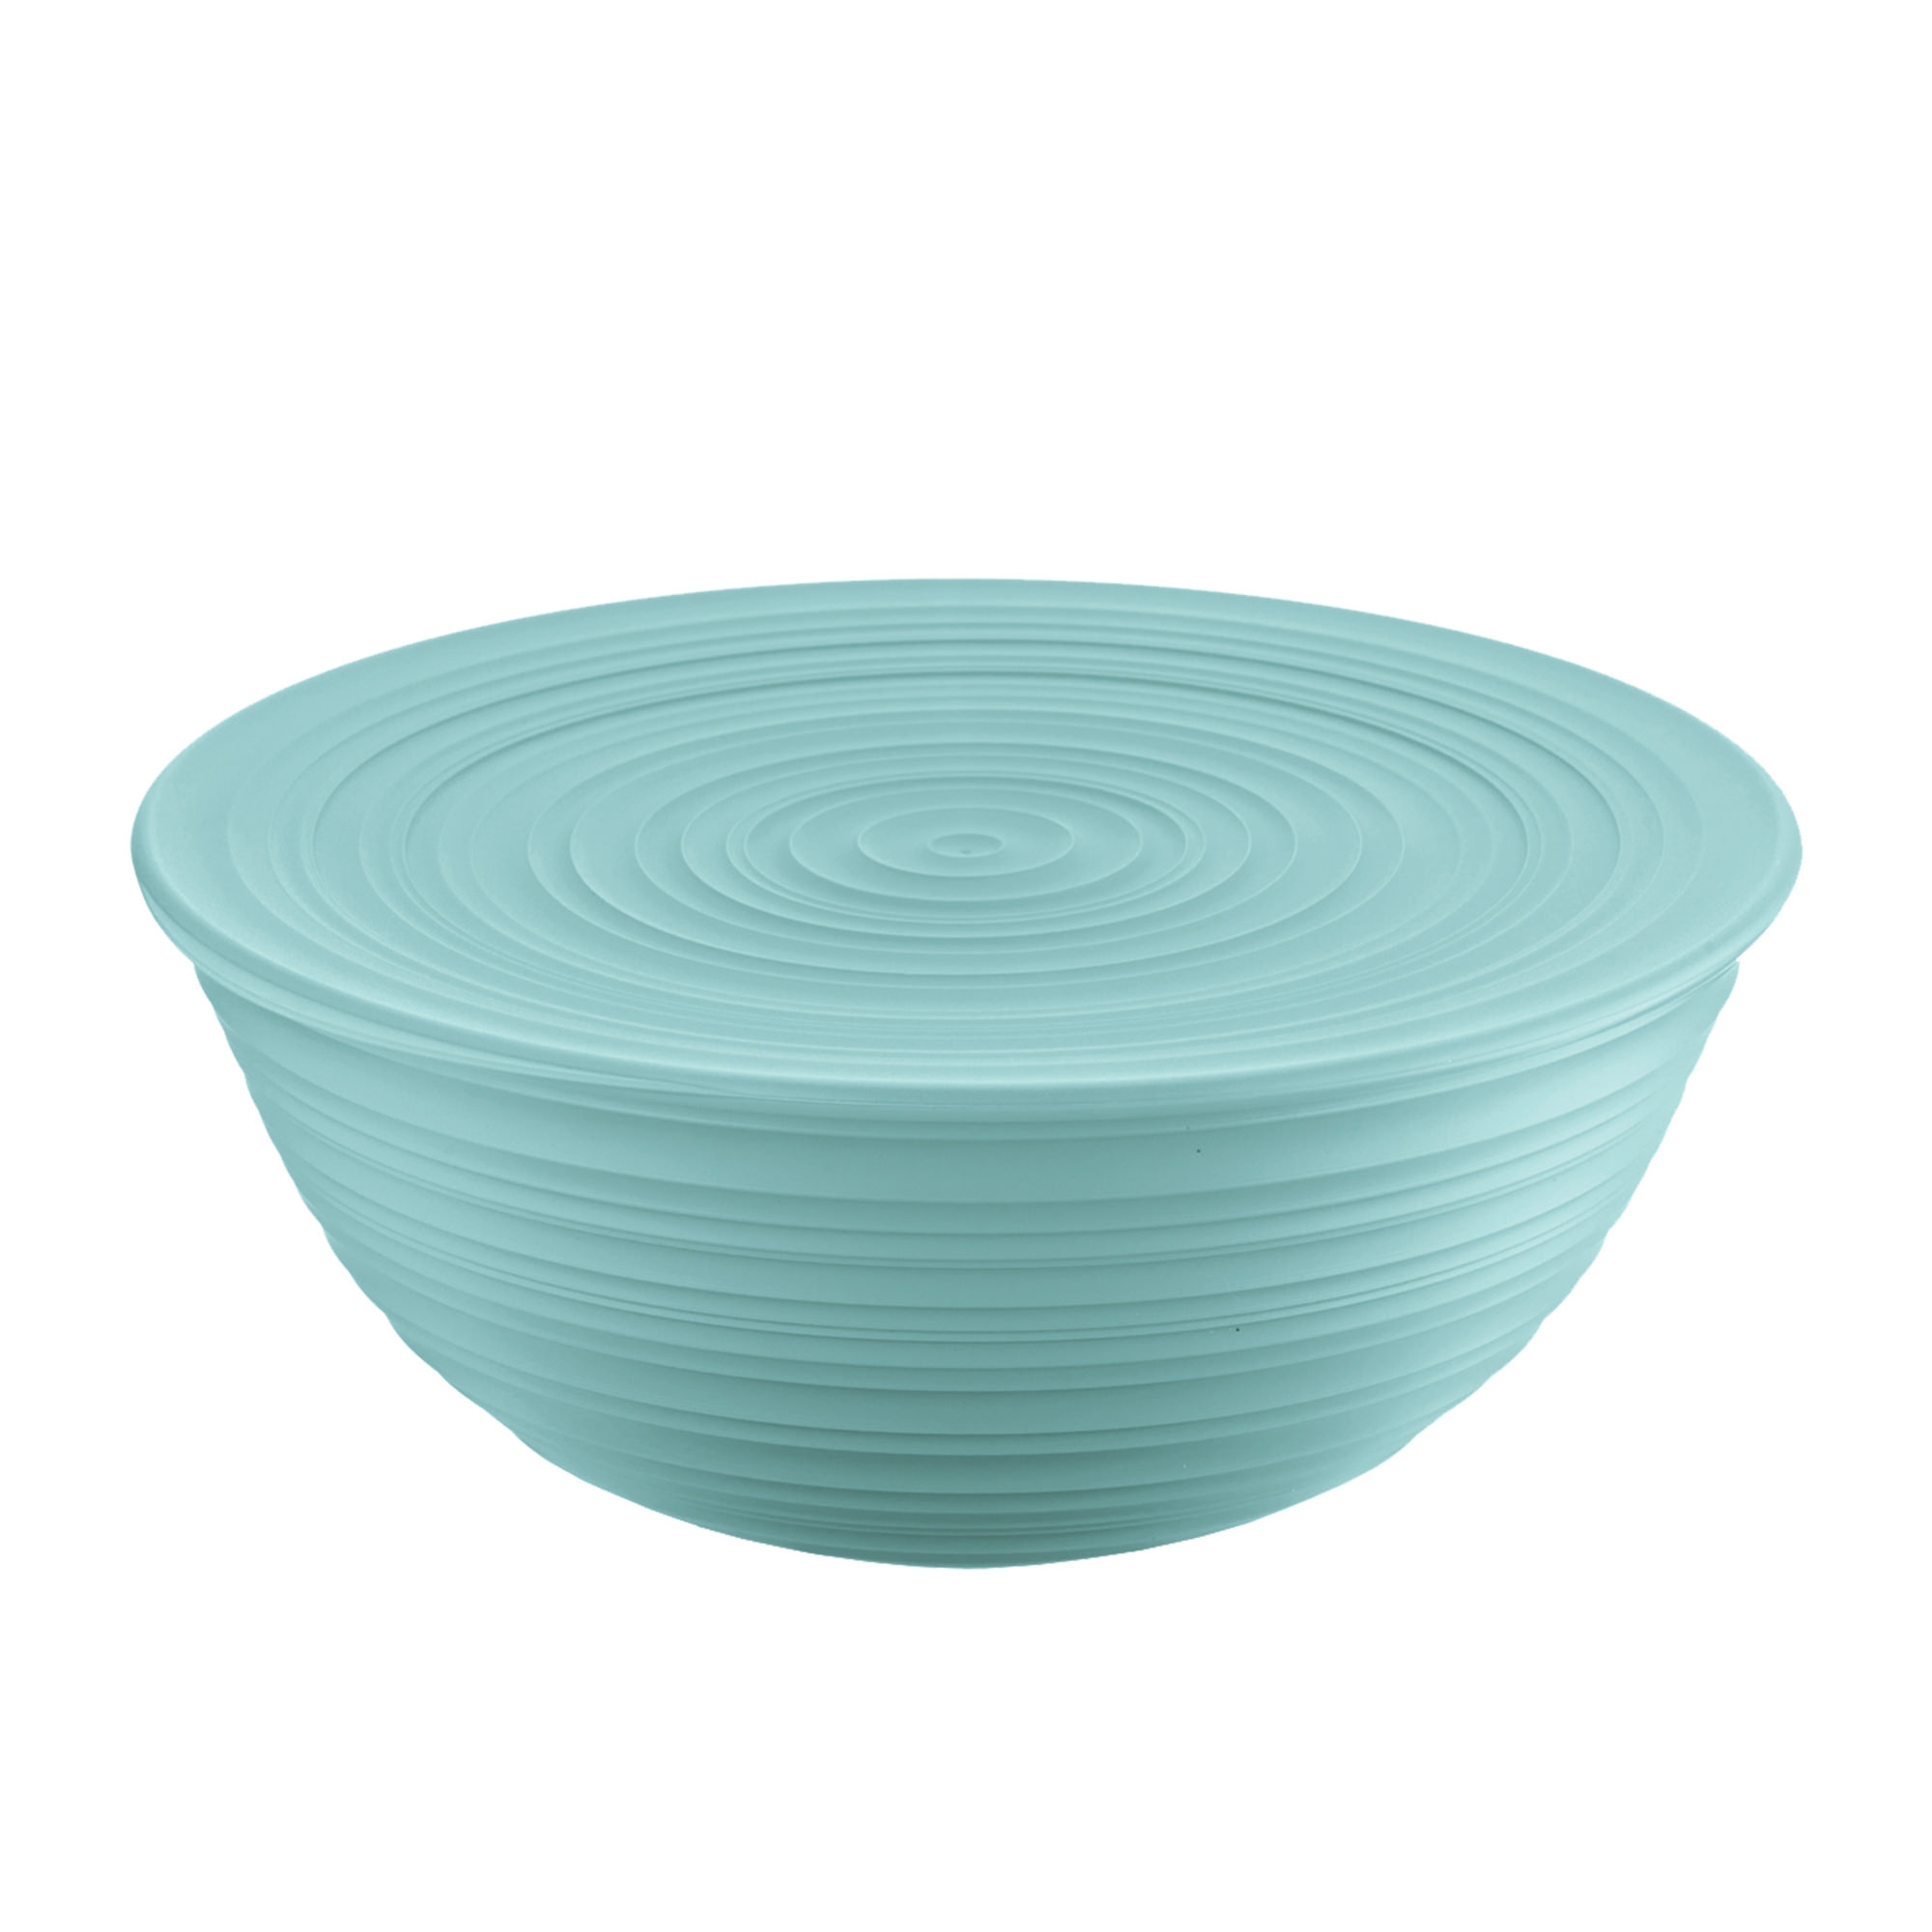 Guzzini Earth Tierra Bowl with Lid Extra Large Sage Green Image 1